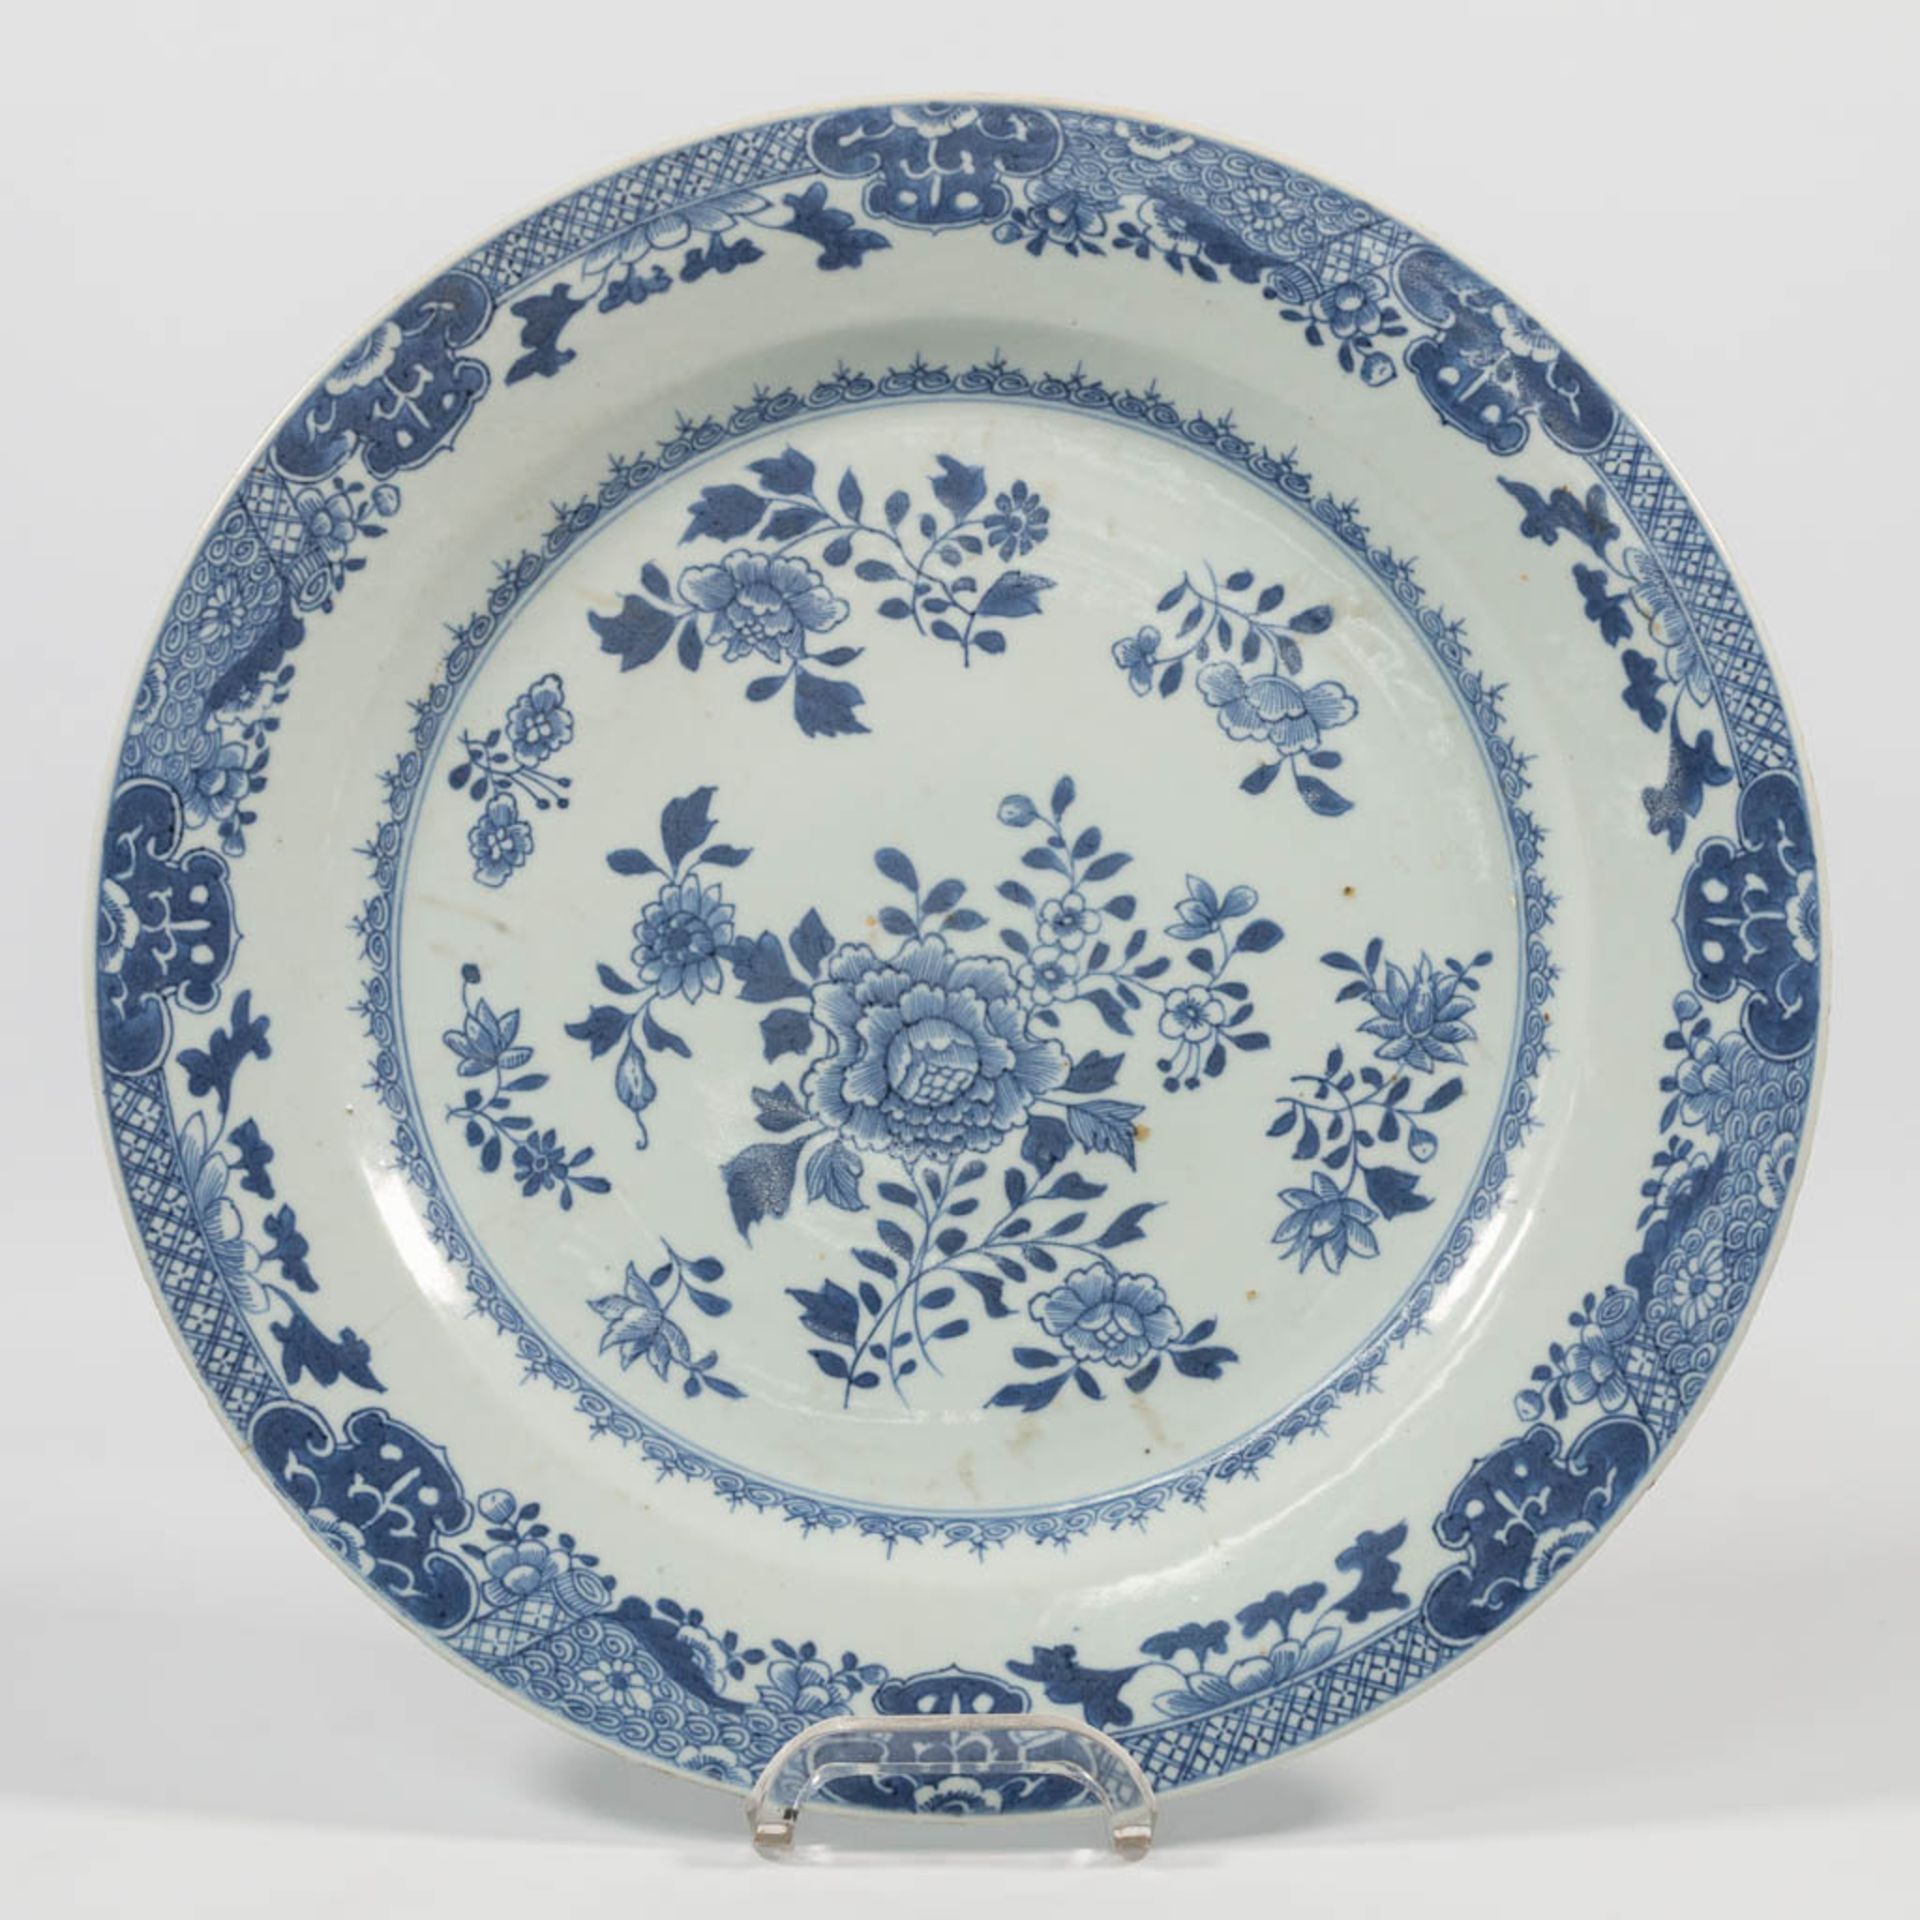 A blue and white Chinese Vase with symbolic decor, combined with 2 blue and white porcelain plates. - Image 25 of 33